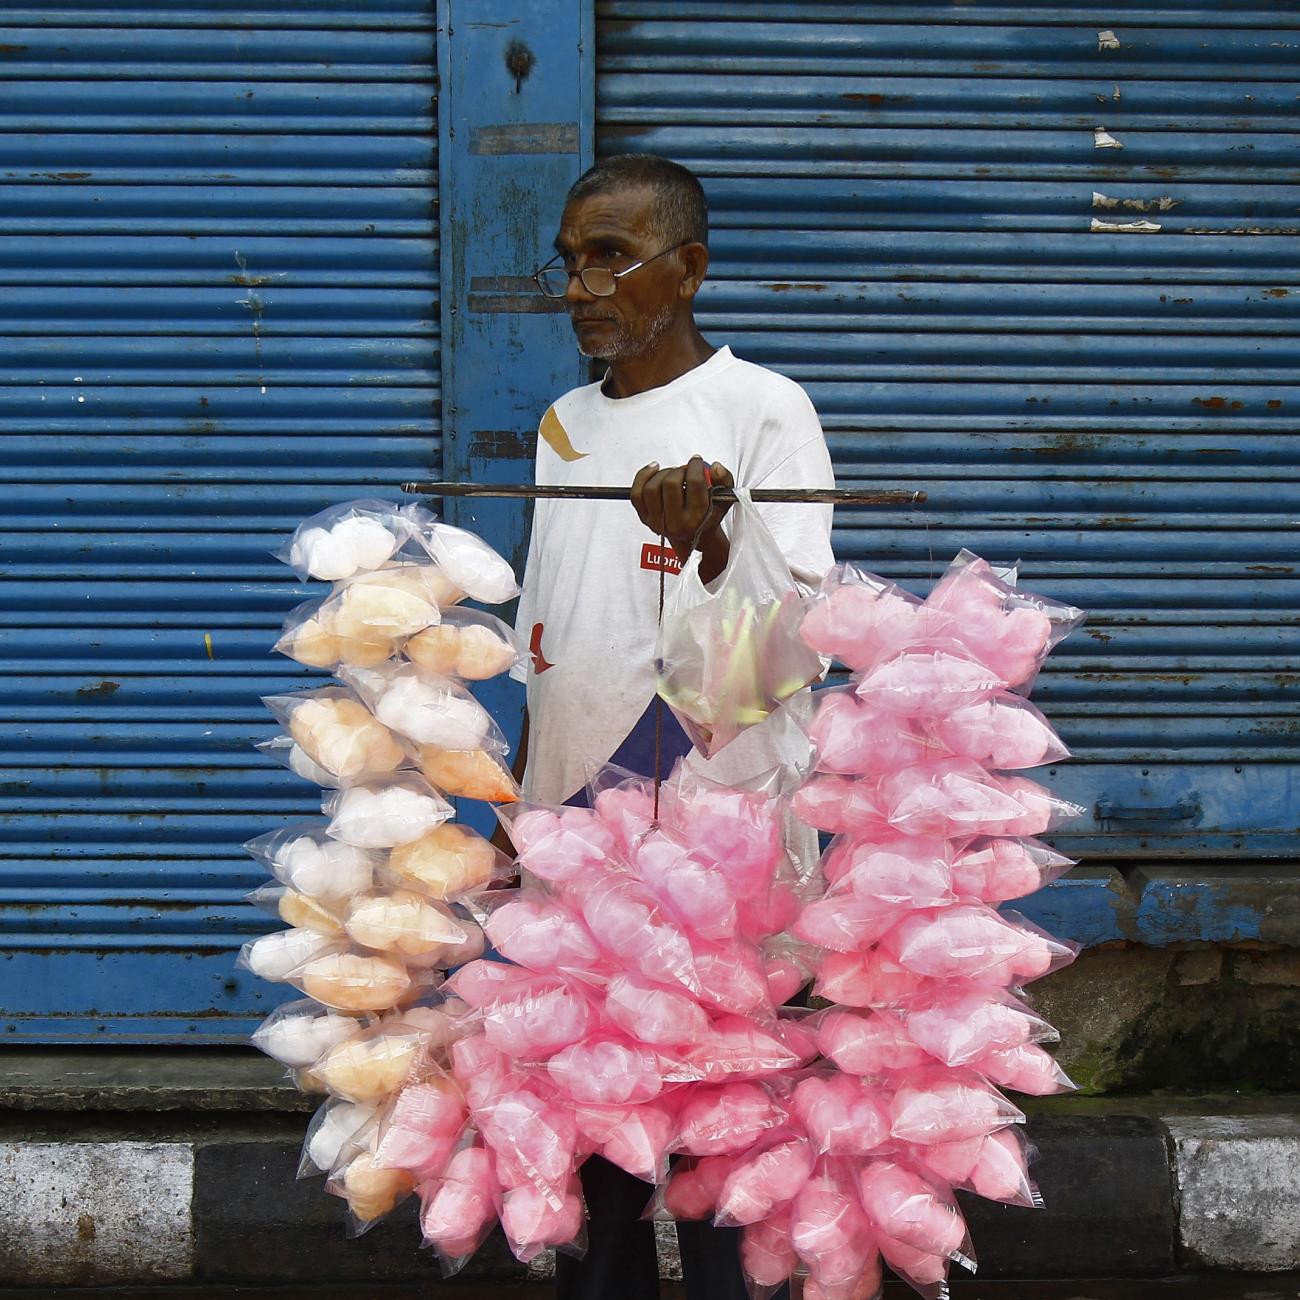 A vendor selling candy floss stands in front of closed shops along the roadside.